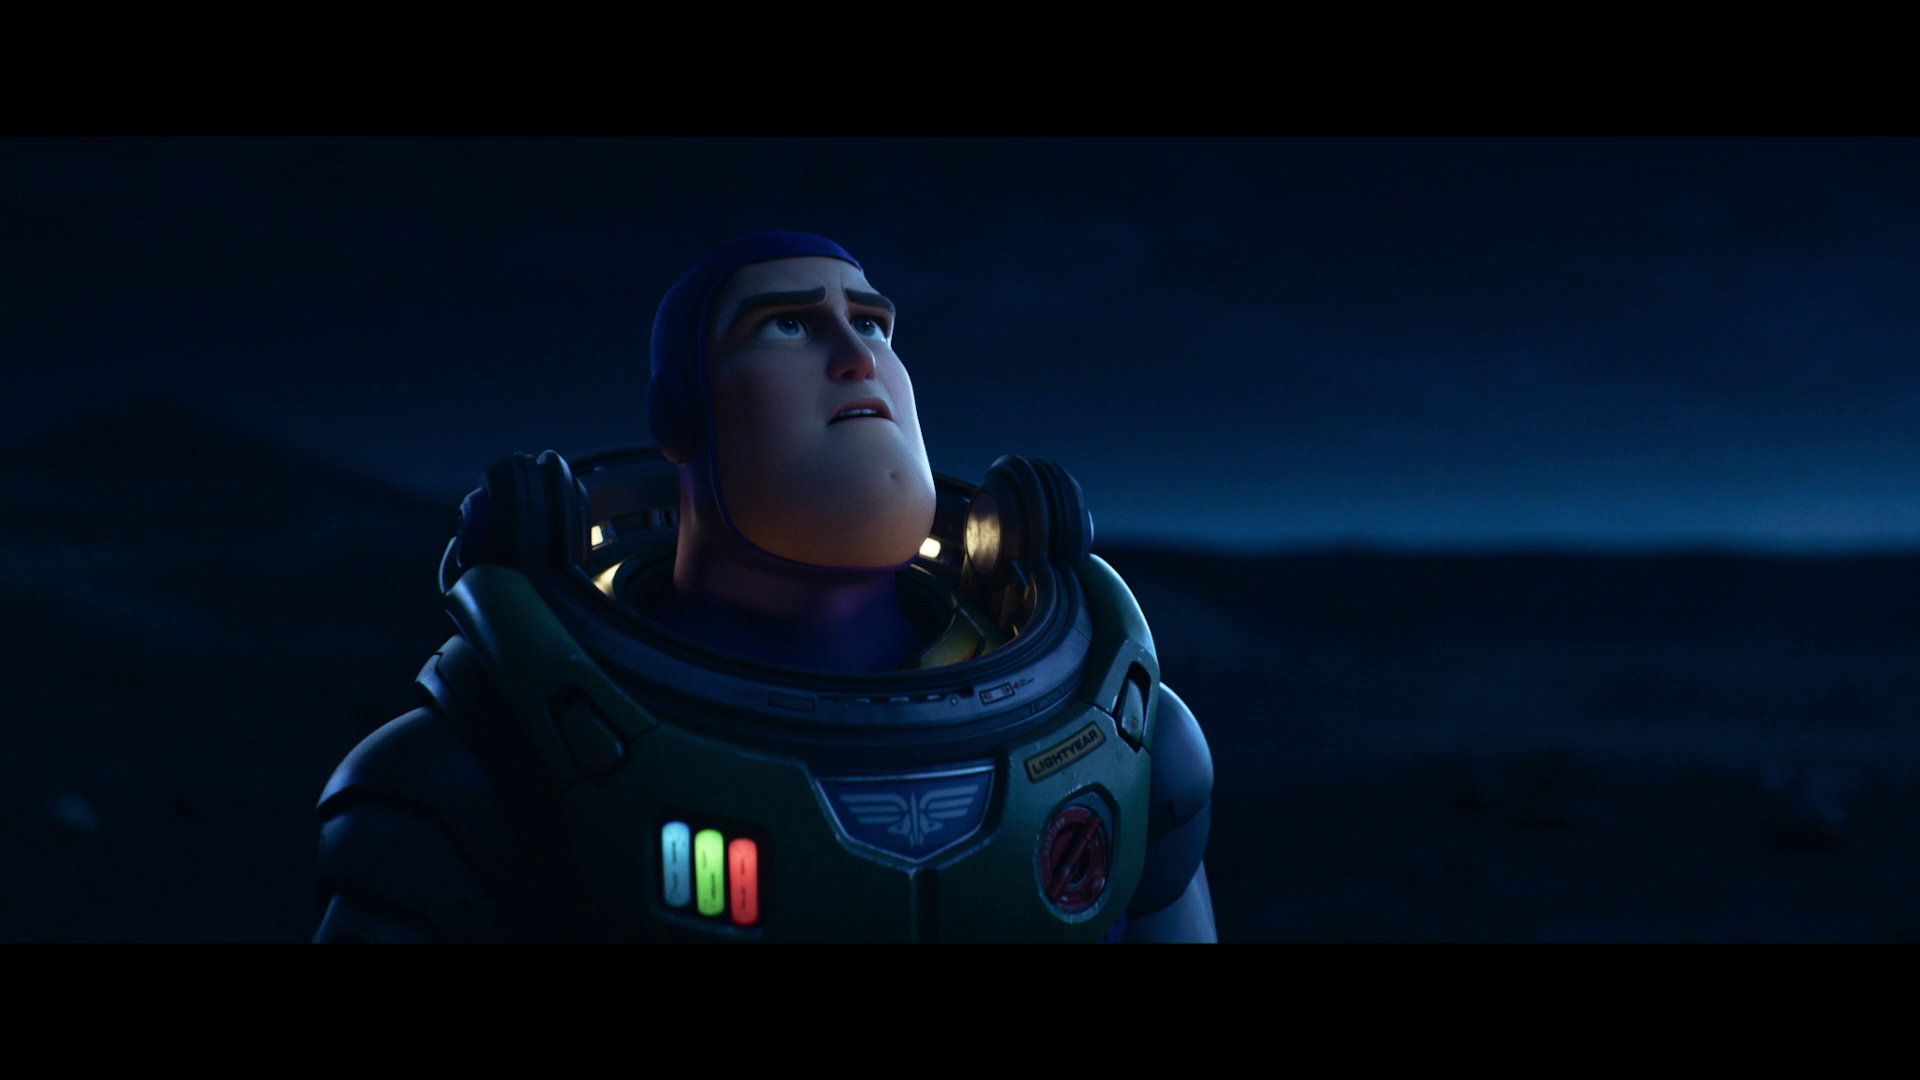 New Lightyear Trailer Is Full Of Fun Footage With Chris Evans' Buzz